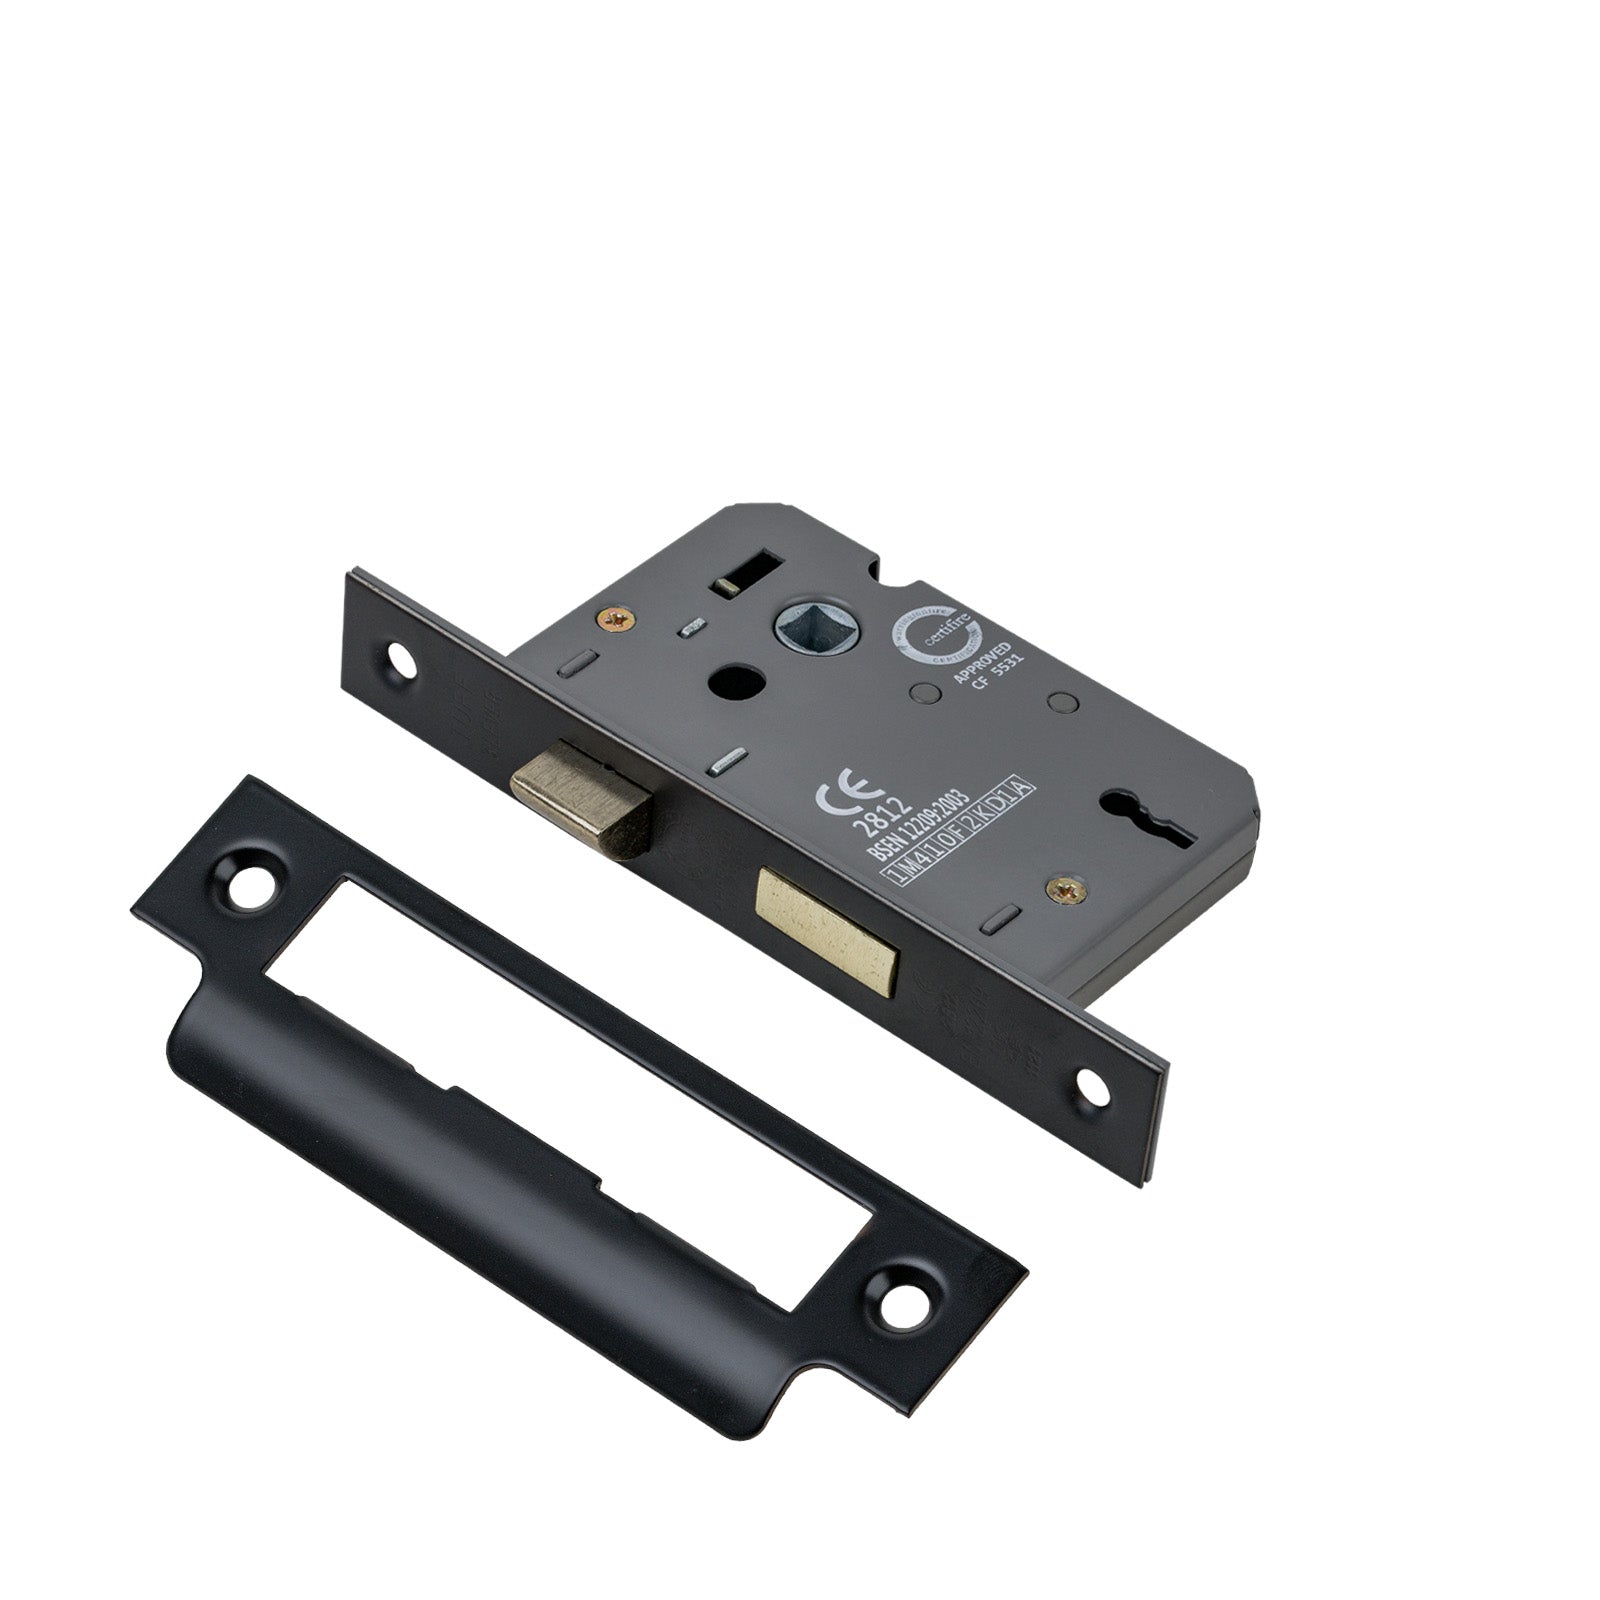 SHOW 3 Lever Sash Lock - 2.5 Inch with Matt Bronze finished forend and striker plate